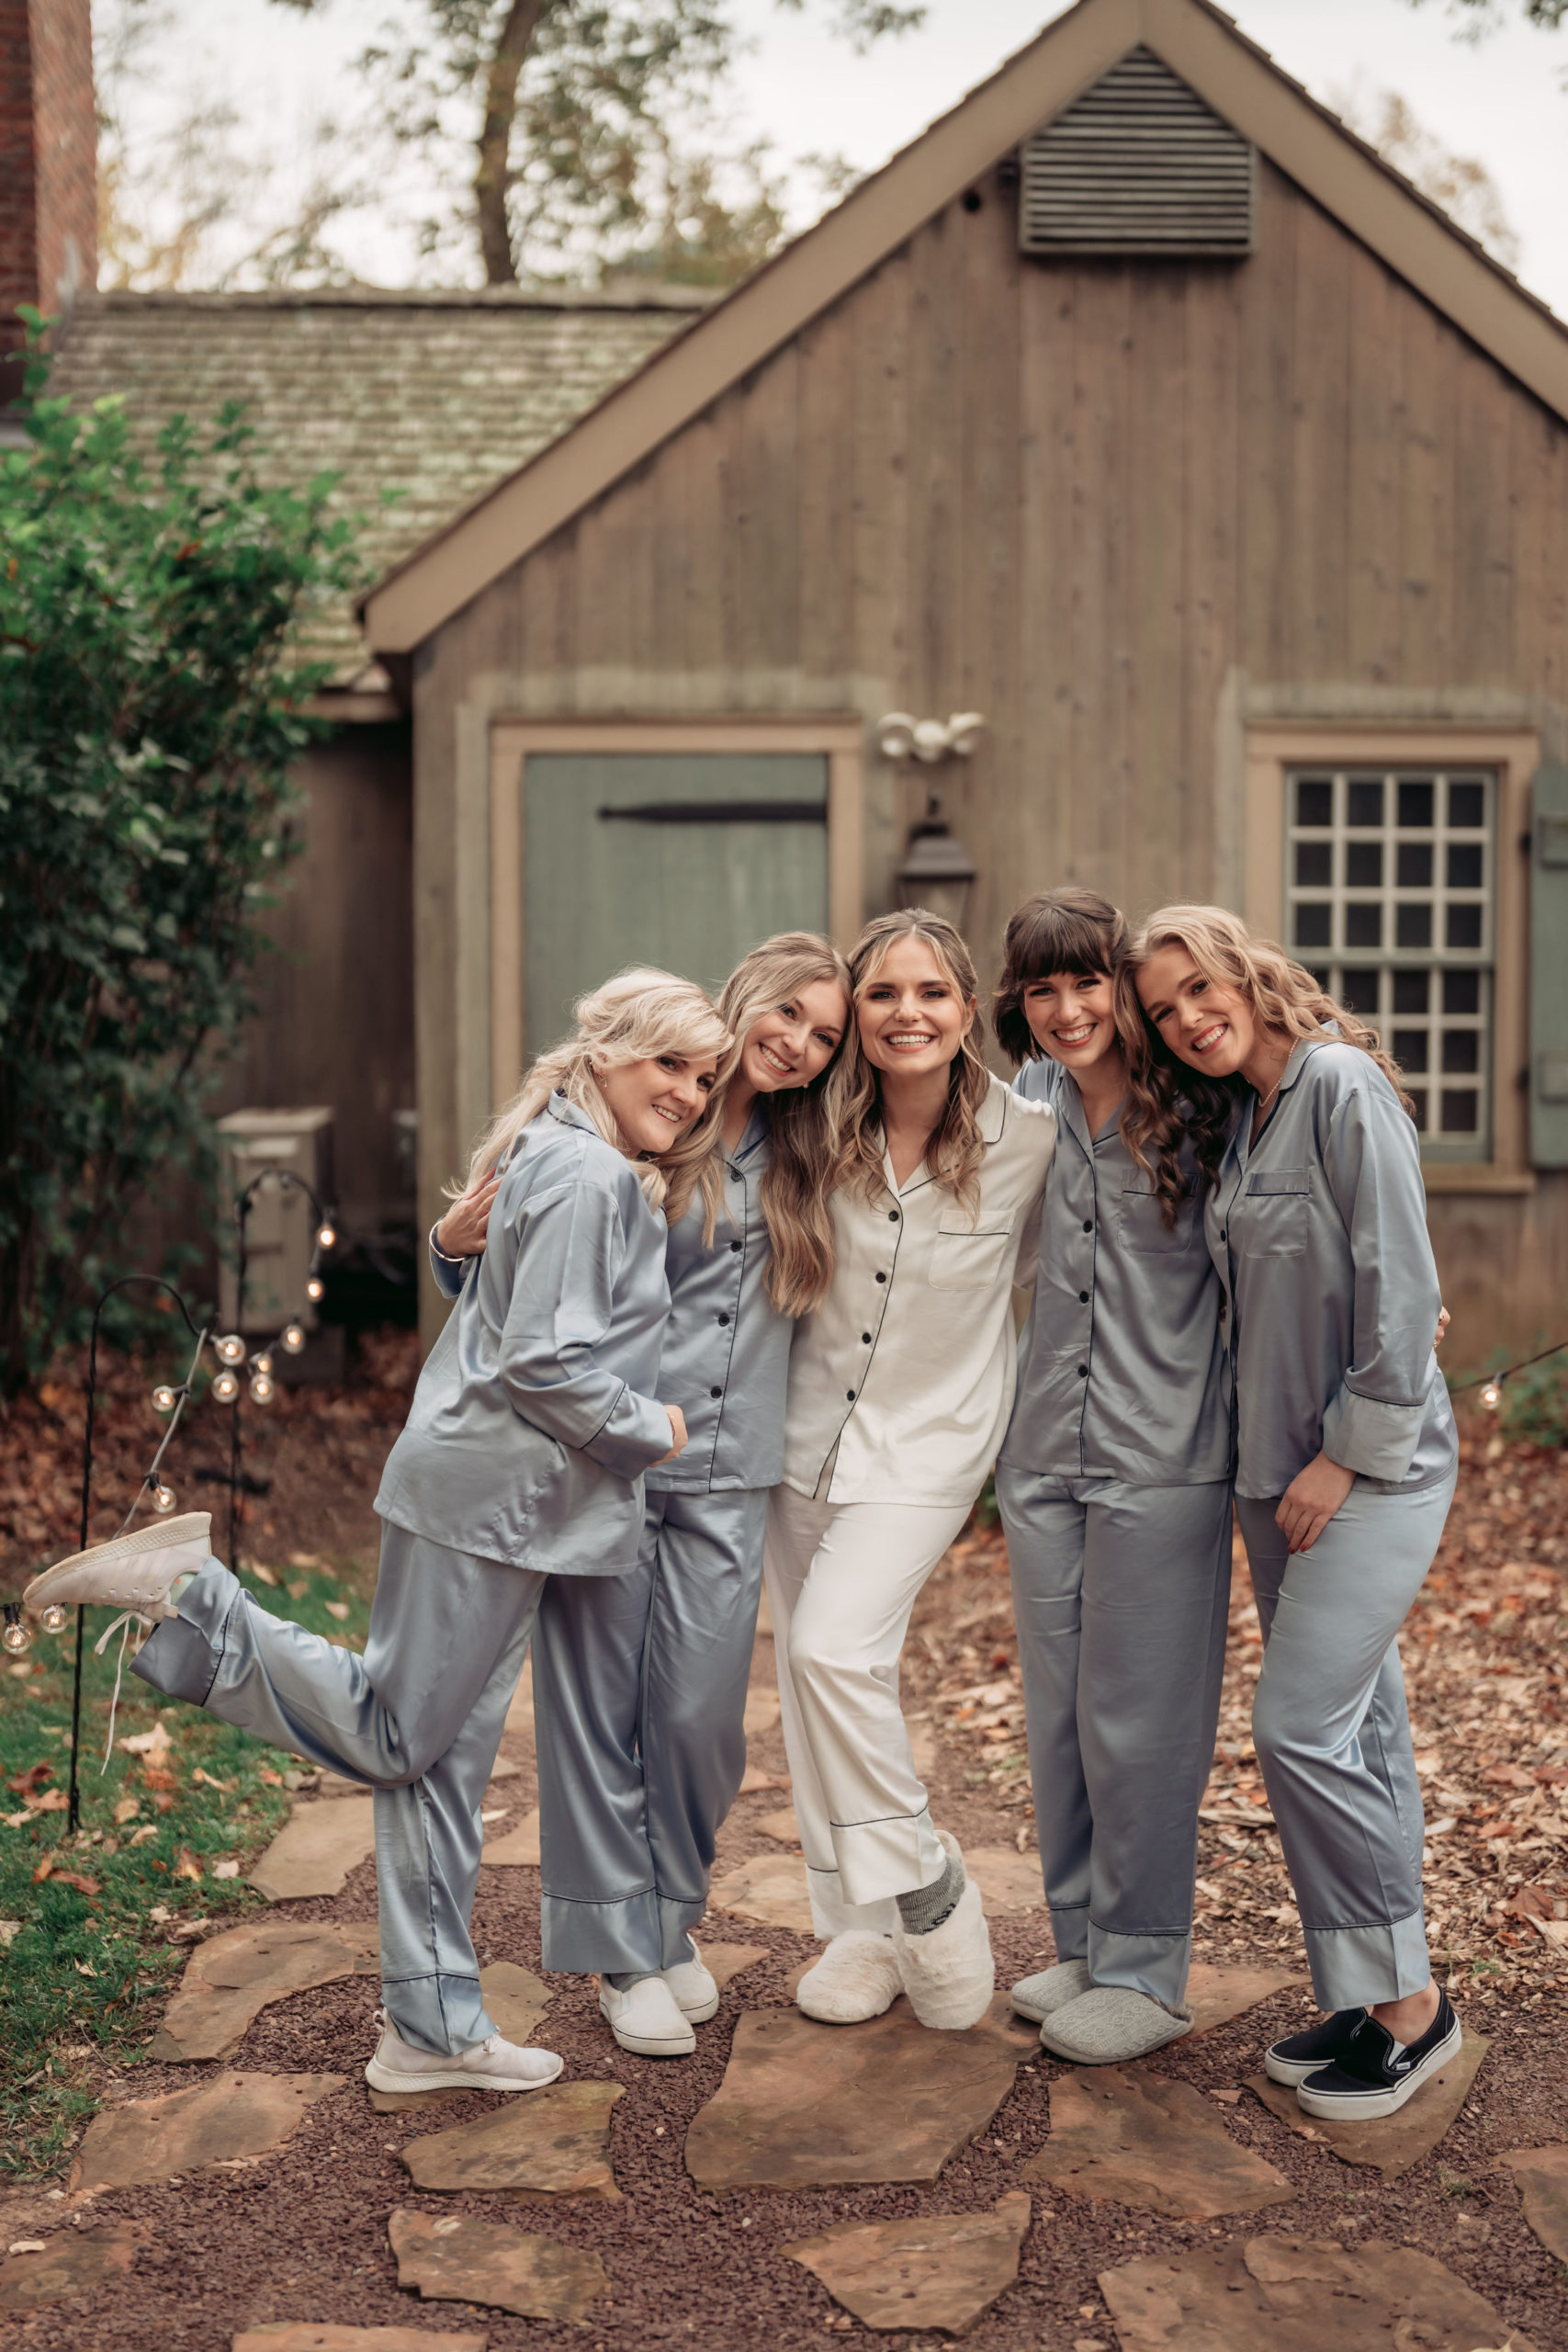 Waterloo Village Wedding, Waterloo Village Wedding Photographer, NJ Weddings, New Jersey Wedding Photographer, Rustic Fall New Jersey Wedding, NJ Wedding Photographer, Sussex County NJ  Photographer, New Jersey Wedding Venues, Sussex County Wedding Photography, Wedding Inspiration, Wedding Planning, Wedding Ideas, Unique Wedding Photos, Wedding Photo Ideas, bride and bridesmaids smiling for a group photo in their bluish gray matching pajamas before getting dressed 